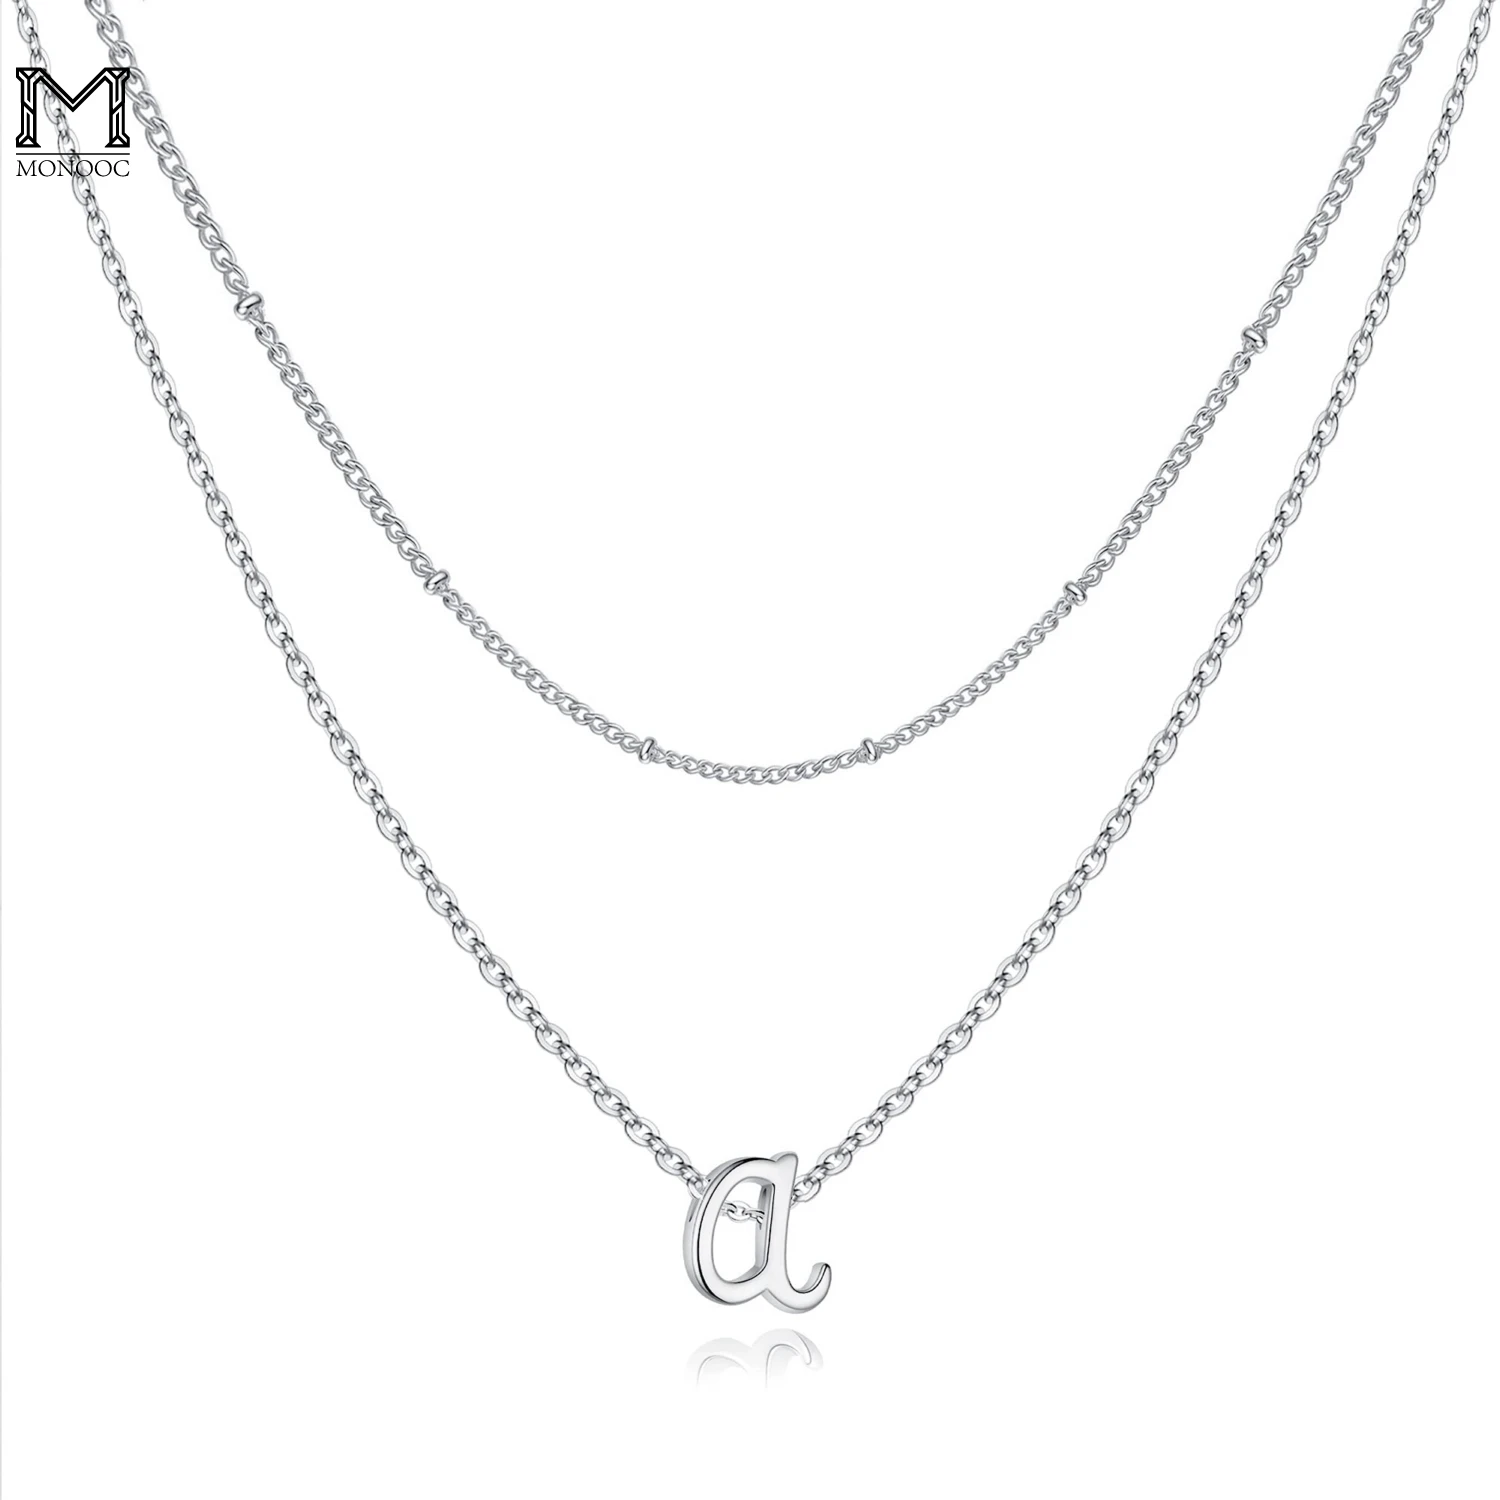 

MONOOC Layered Initial Necklaces for Women Girls 14K Gold Plated Layered Personalized Monogram Necklaces Jewelry Gifts 2022 NEW